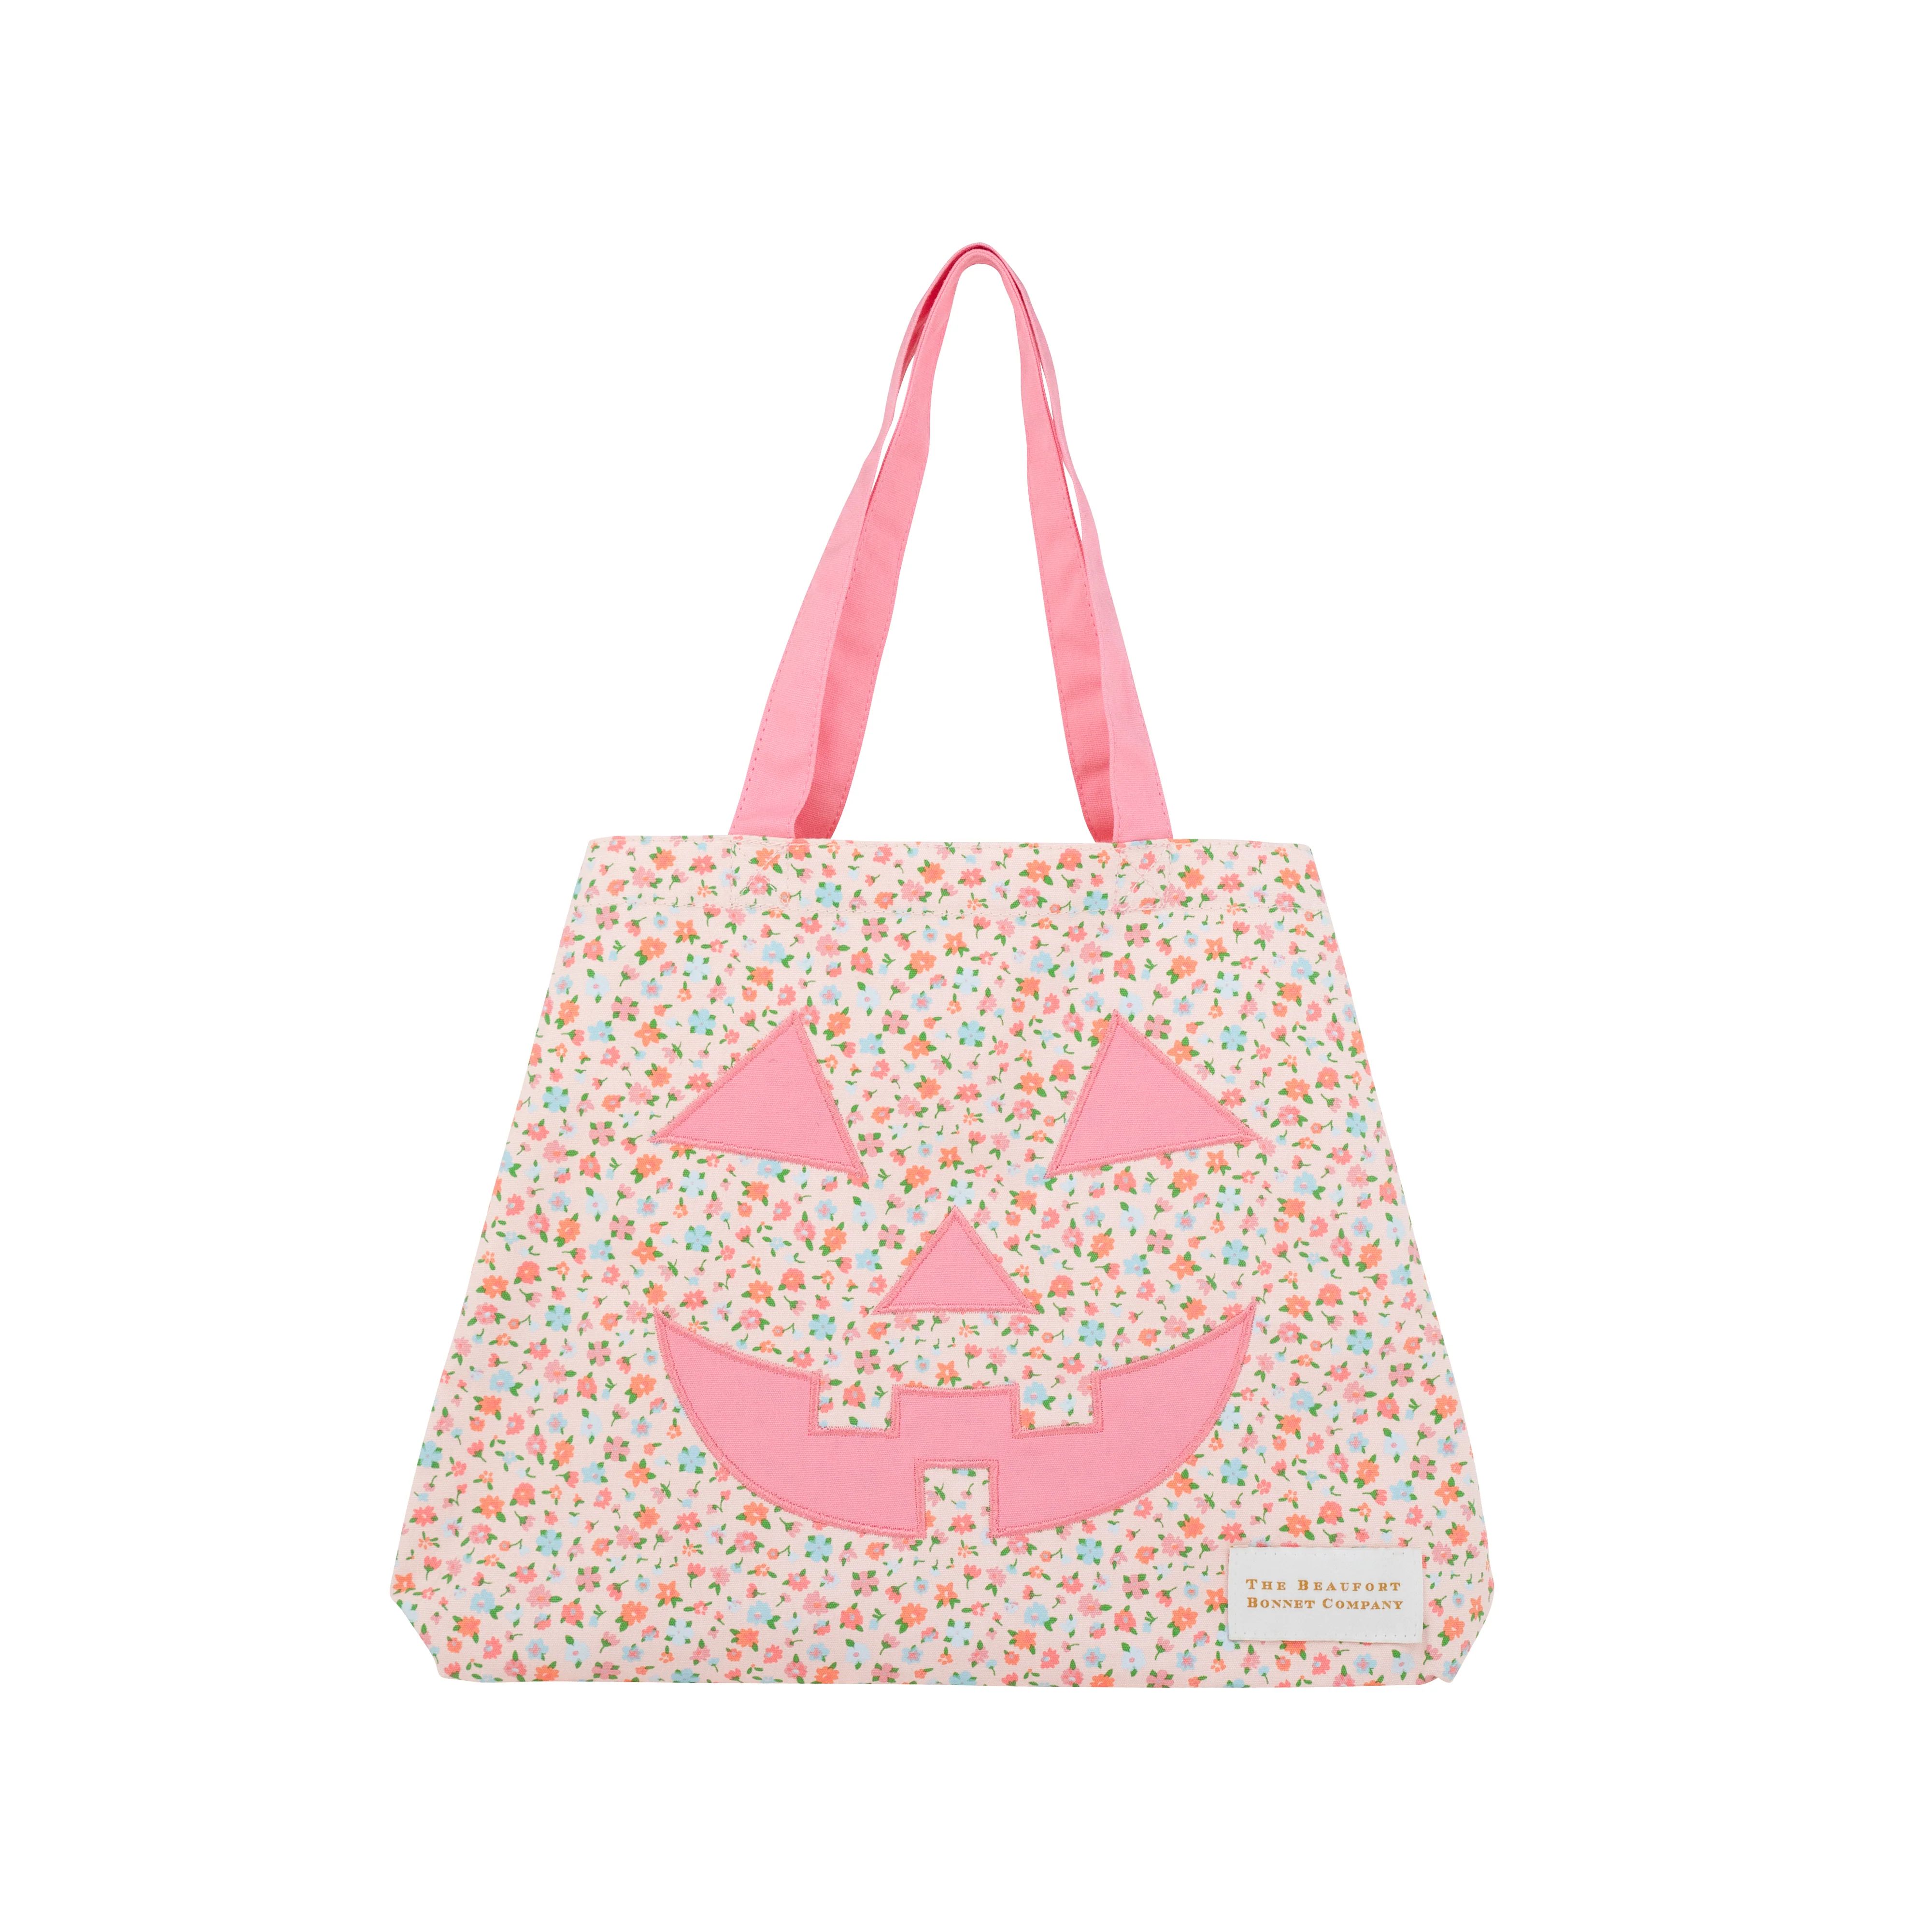 Boofort Candy Carrier - Fall Fest Floral with Hamptons Hot Pink | The Beaufort Bonnet Company